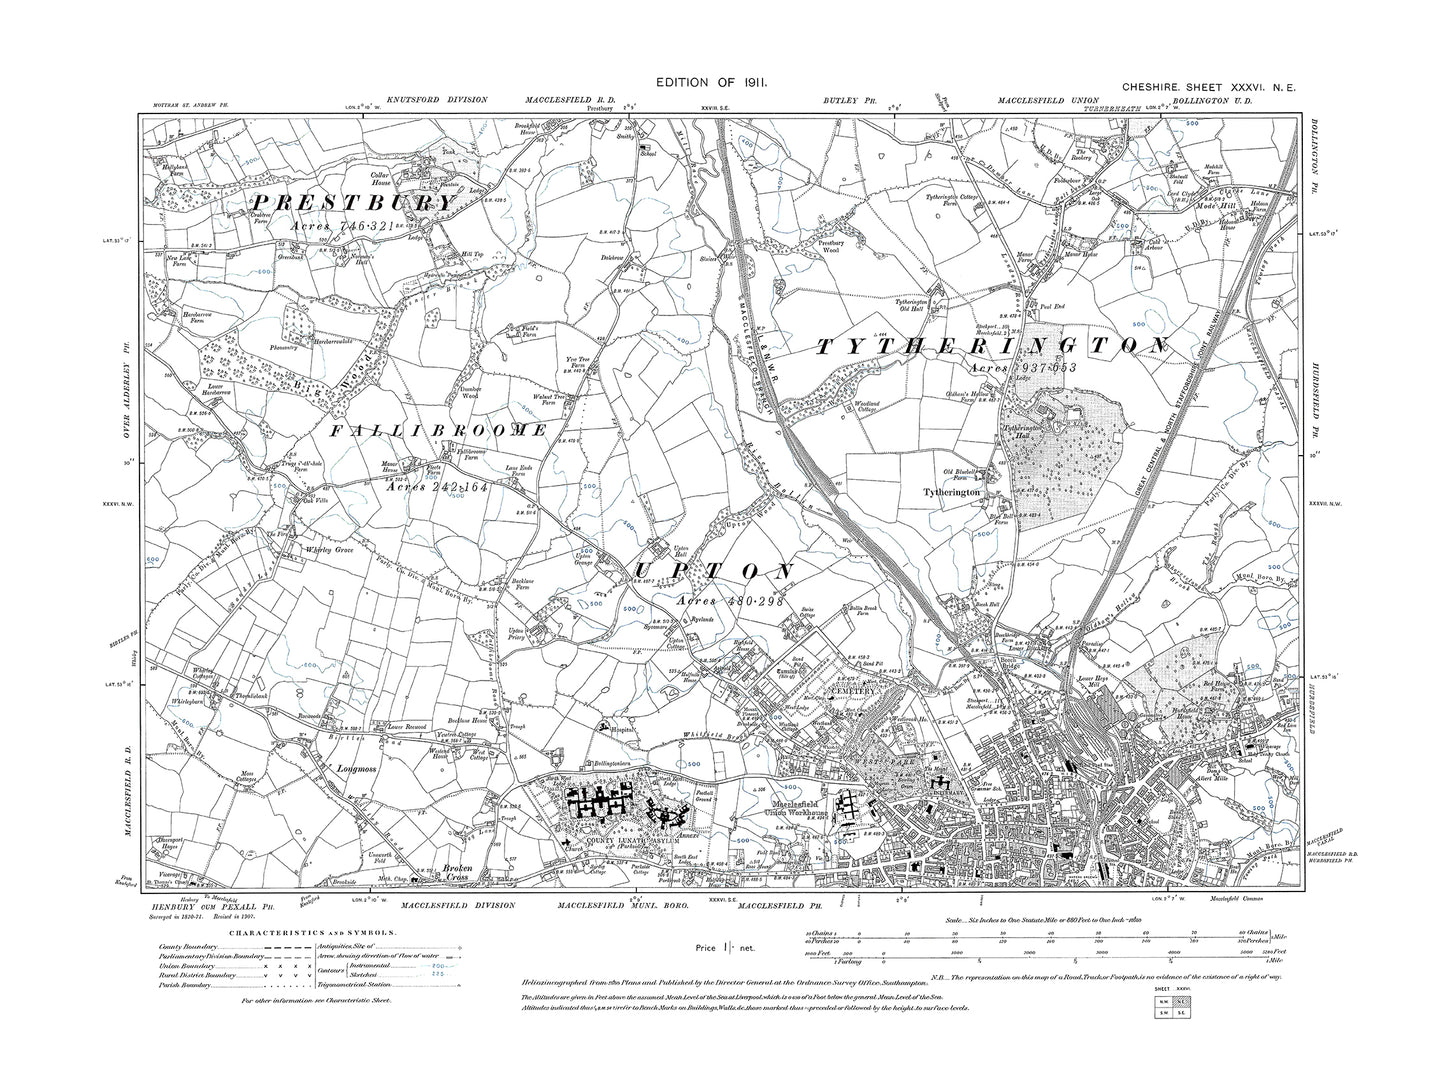 Old OS map dated 1911, showing Macclesfield (north), Fallibroome, Prestbury in Cheshire 36NE